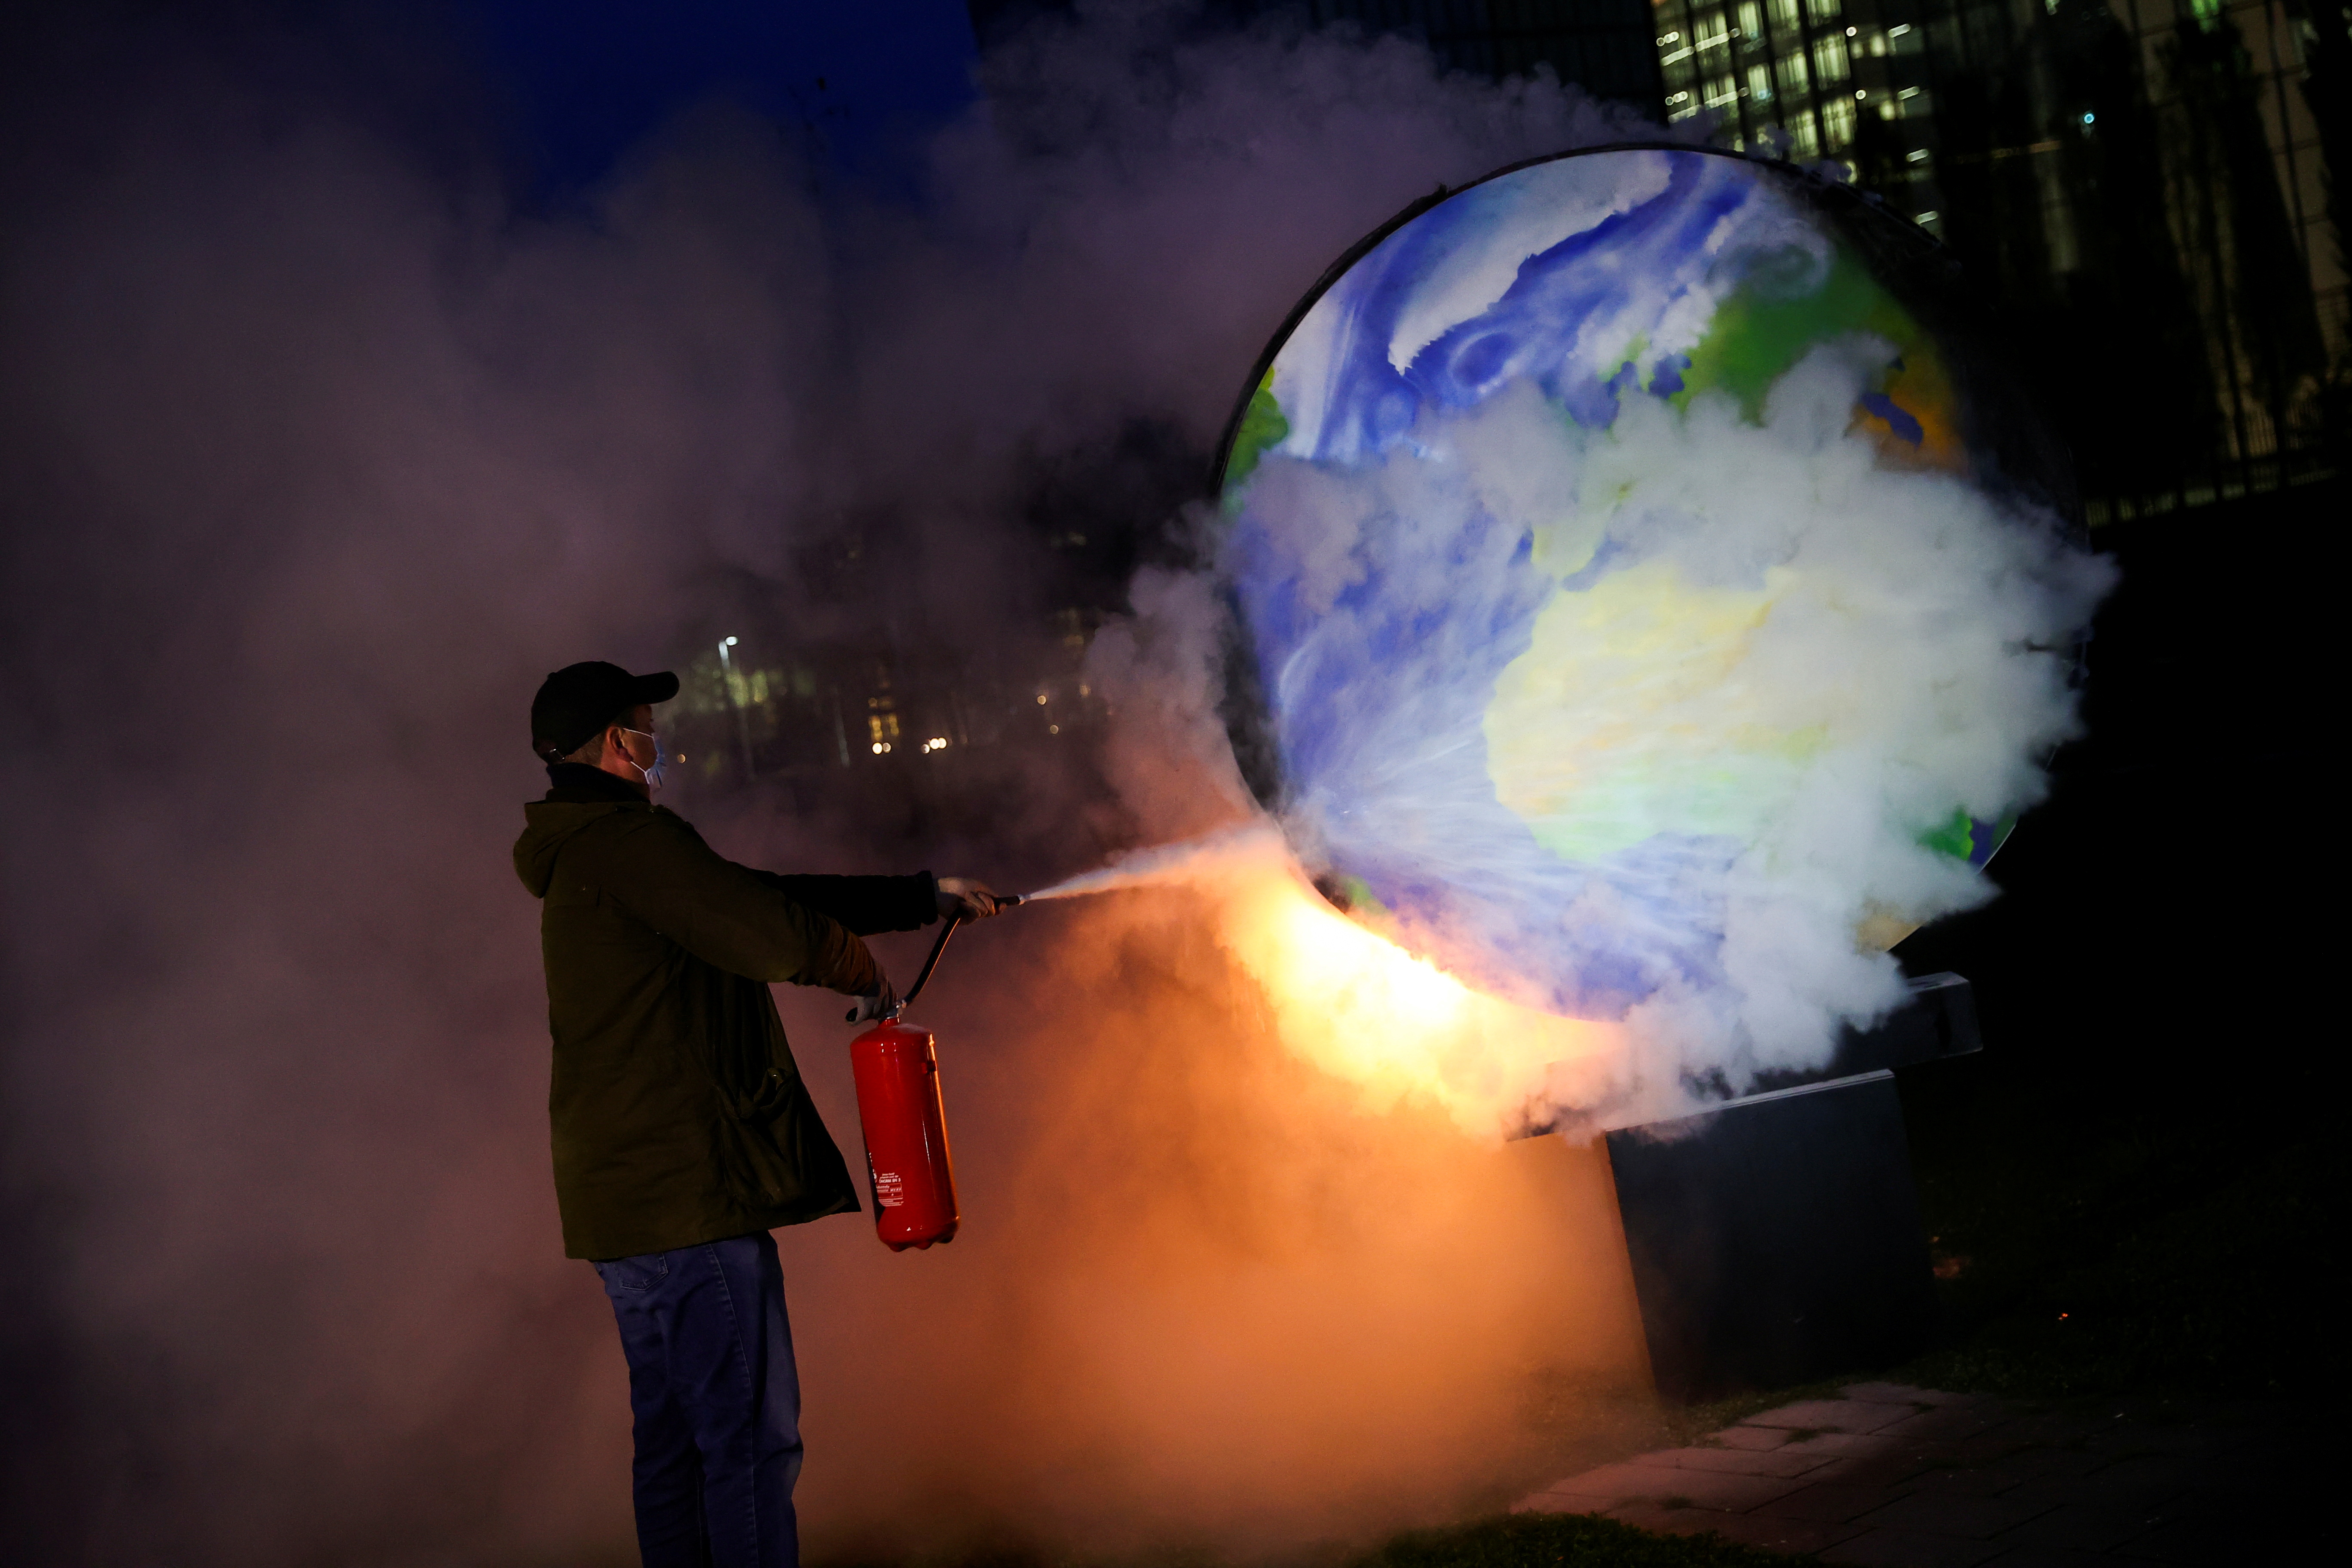 A person uses an extinguisher toward a burning paper-made globe during a demonstration against the fossil fuel industry in Frankfurt, Germany on October 21, 2020. 